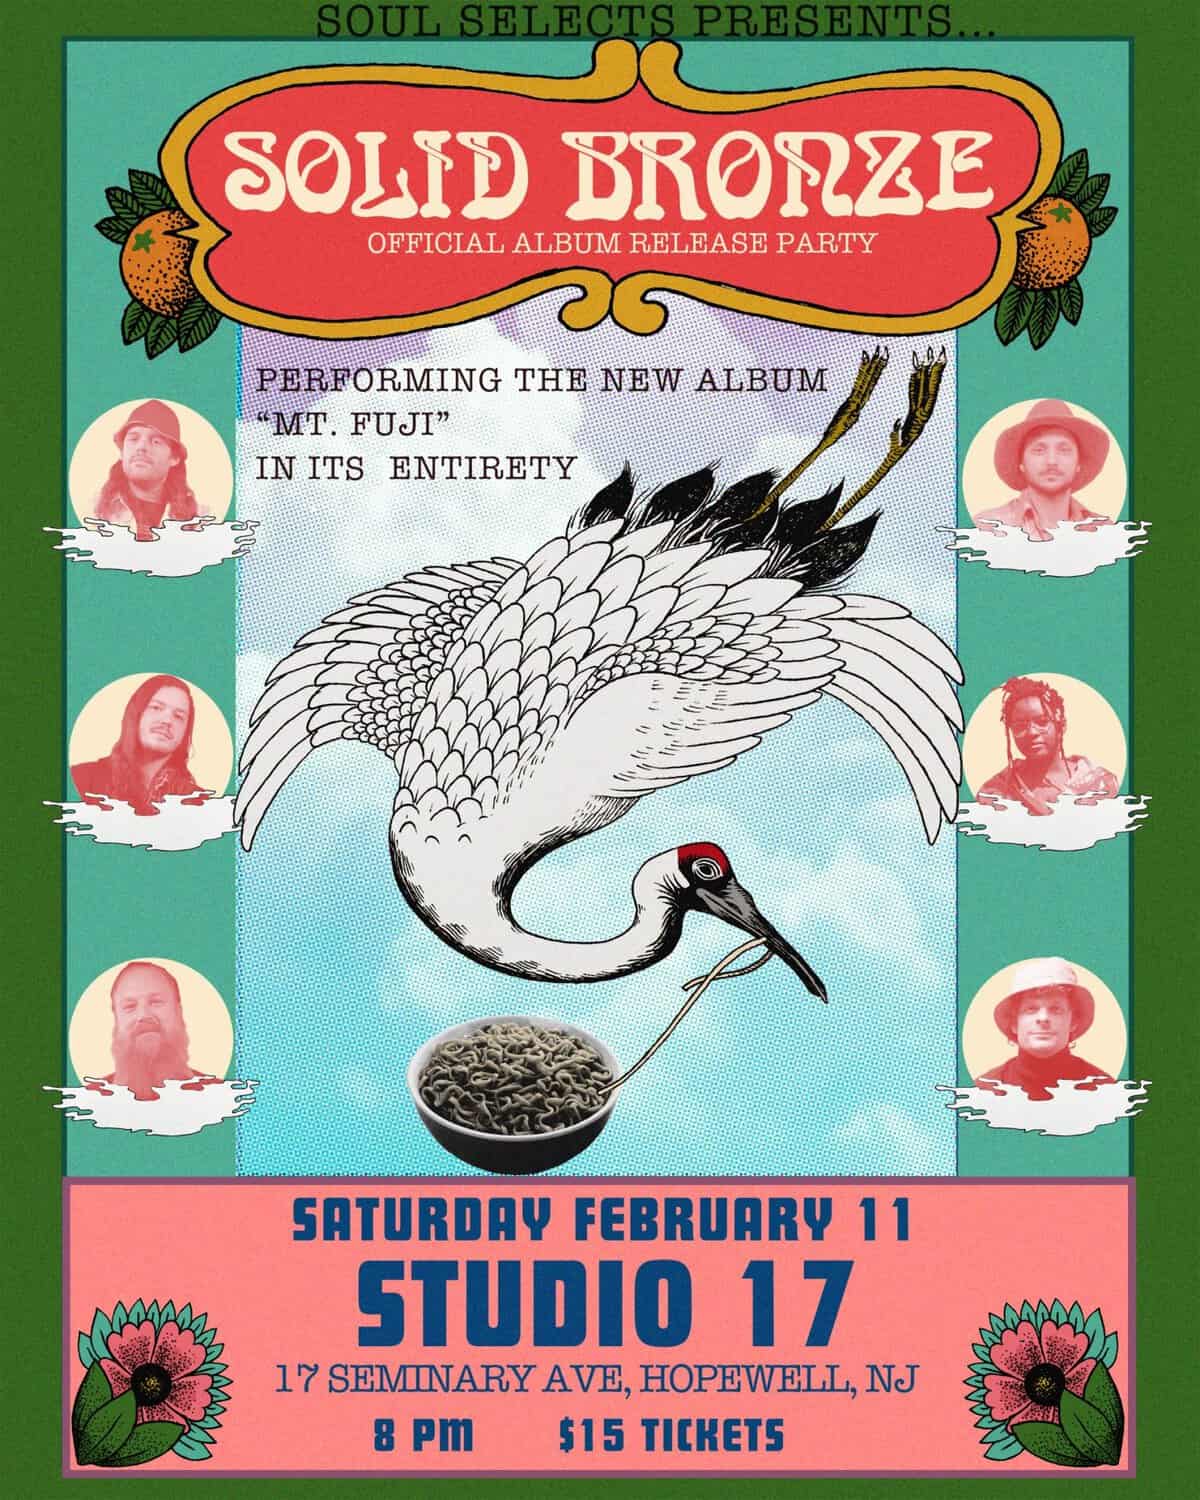 Soul Selects Presents Solid Bronze at Studio 17